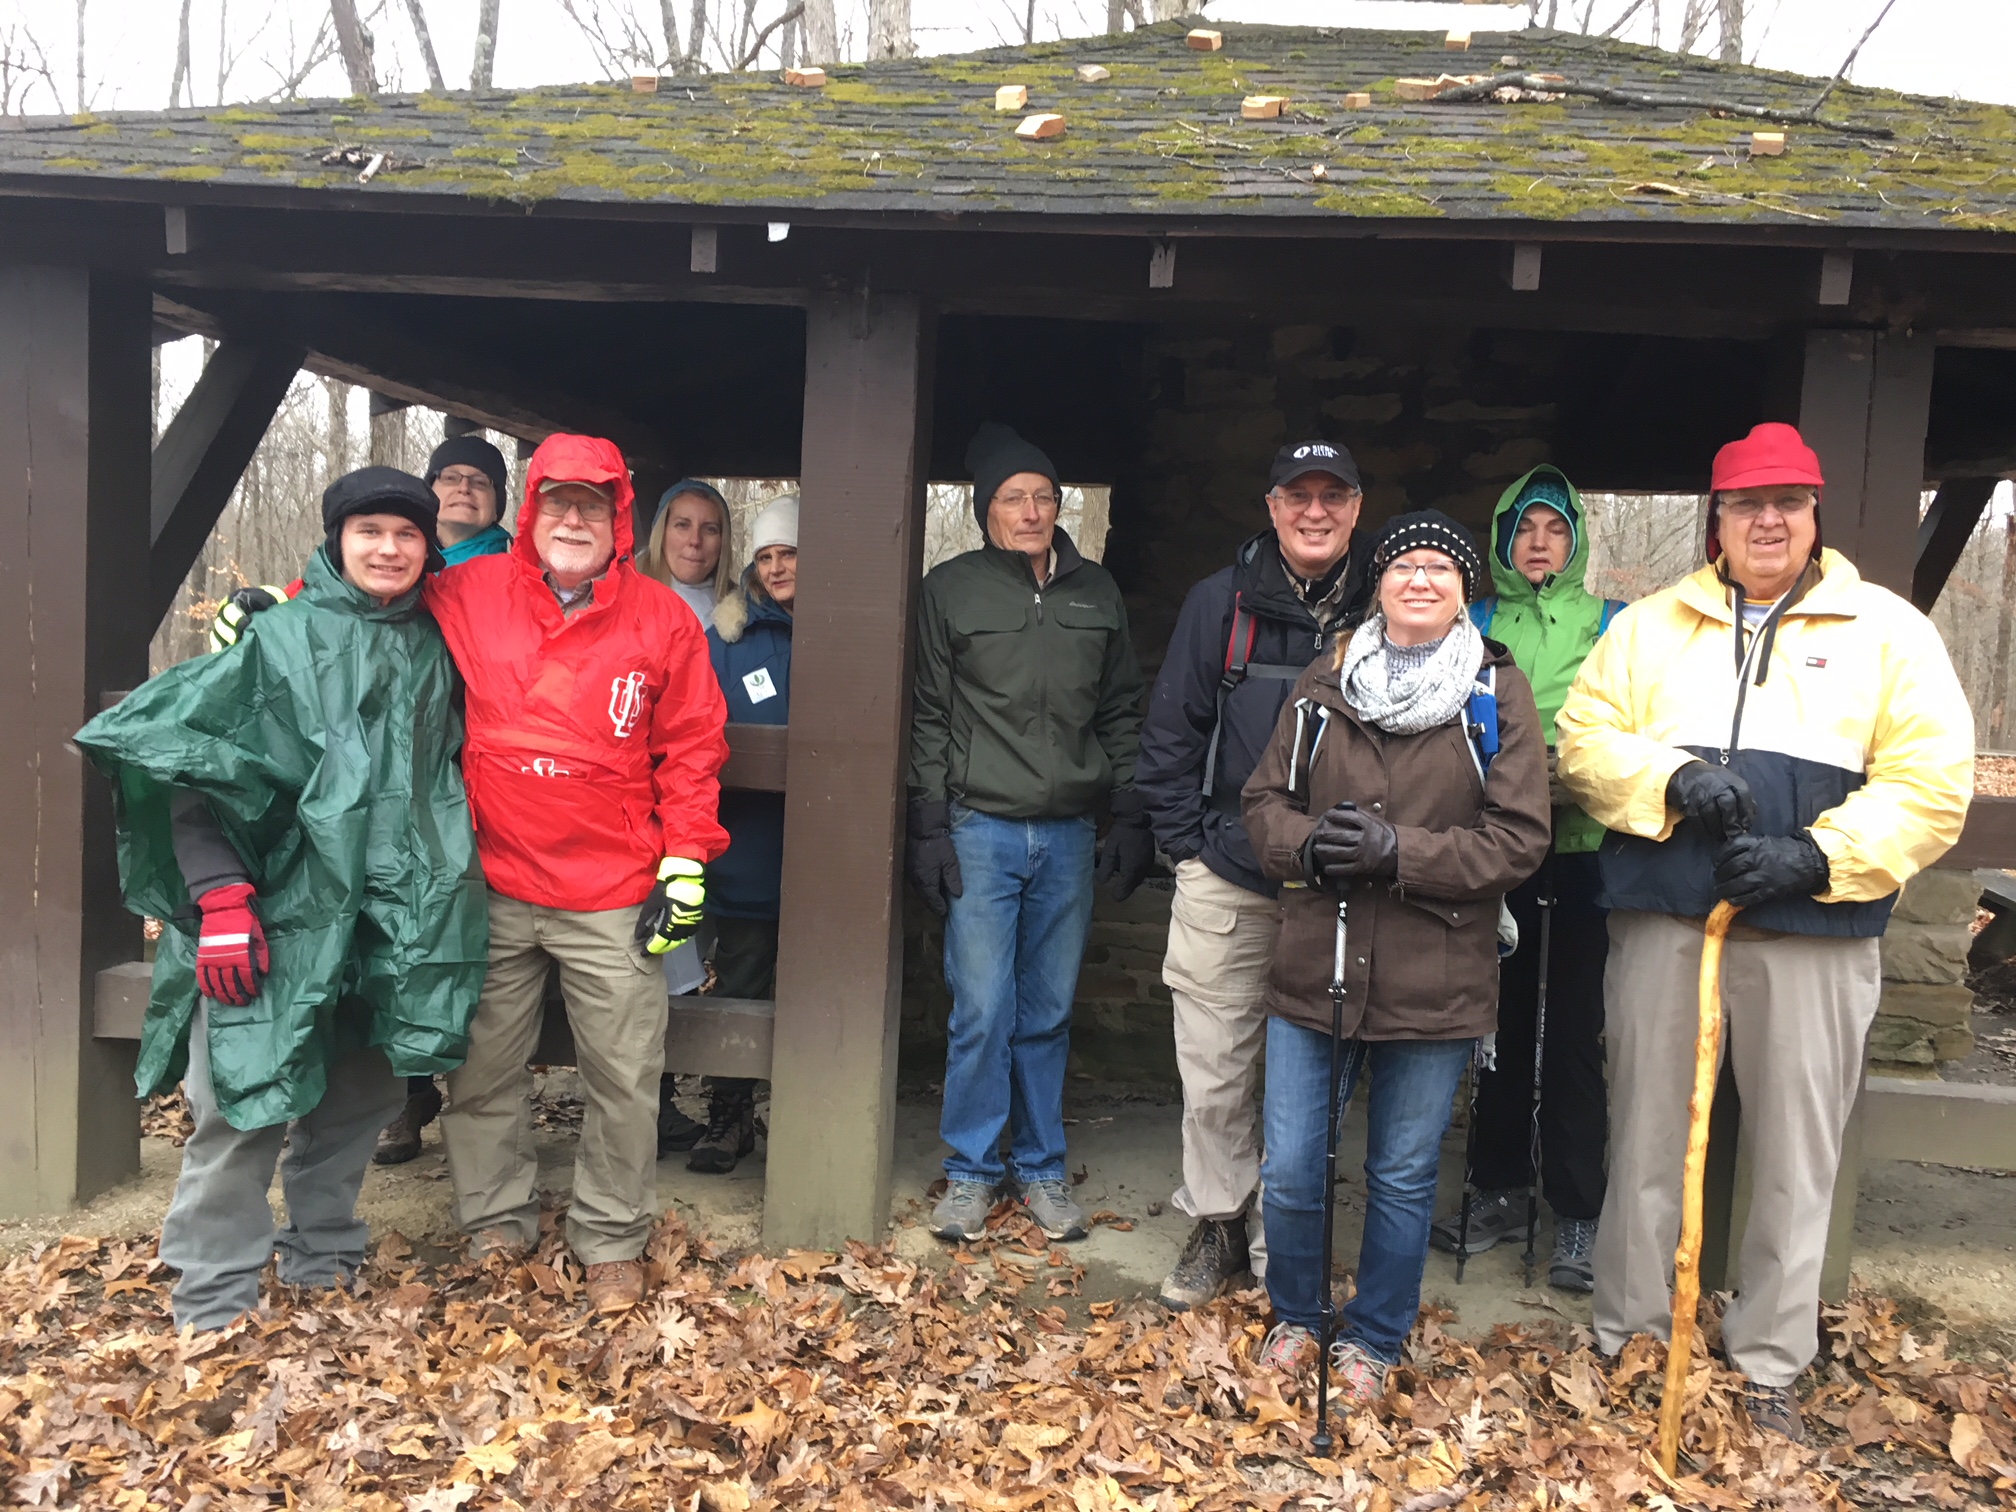 Participants on Winding Waters hike stood in shelter